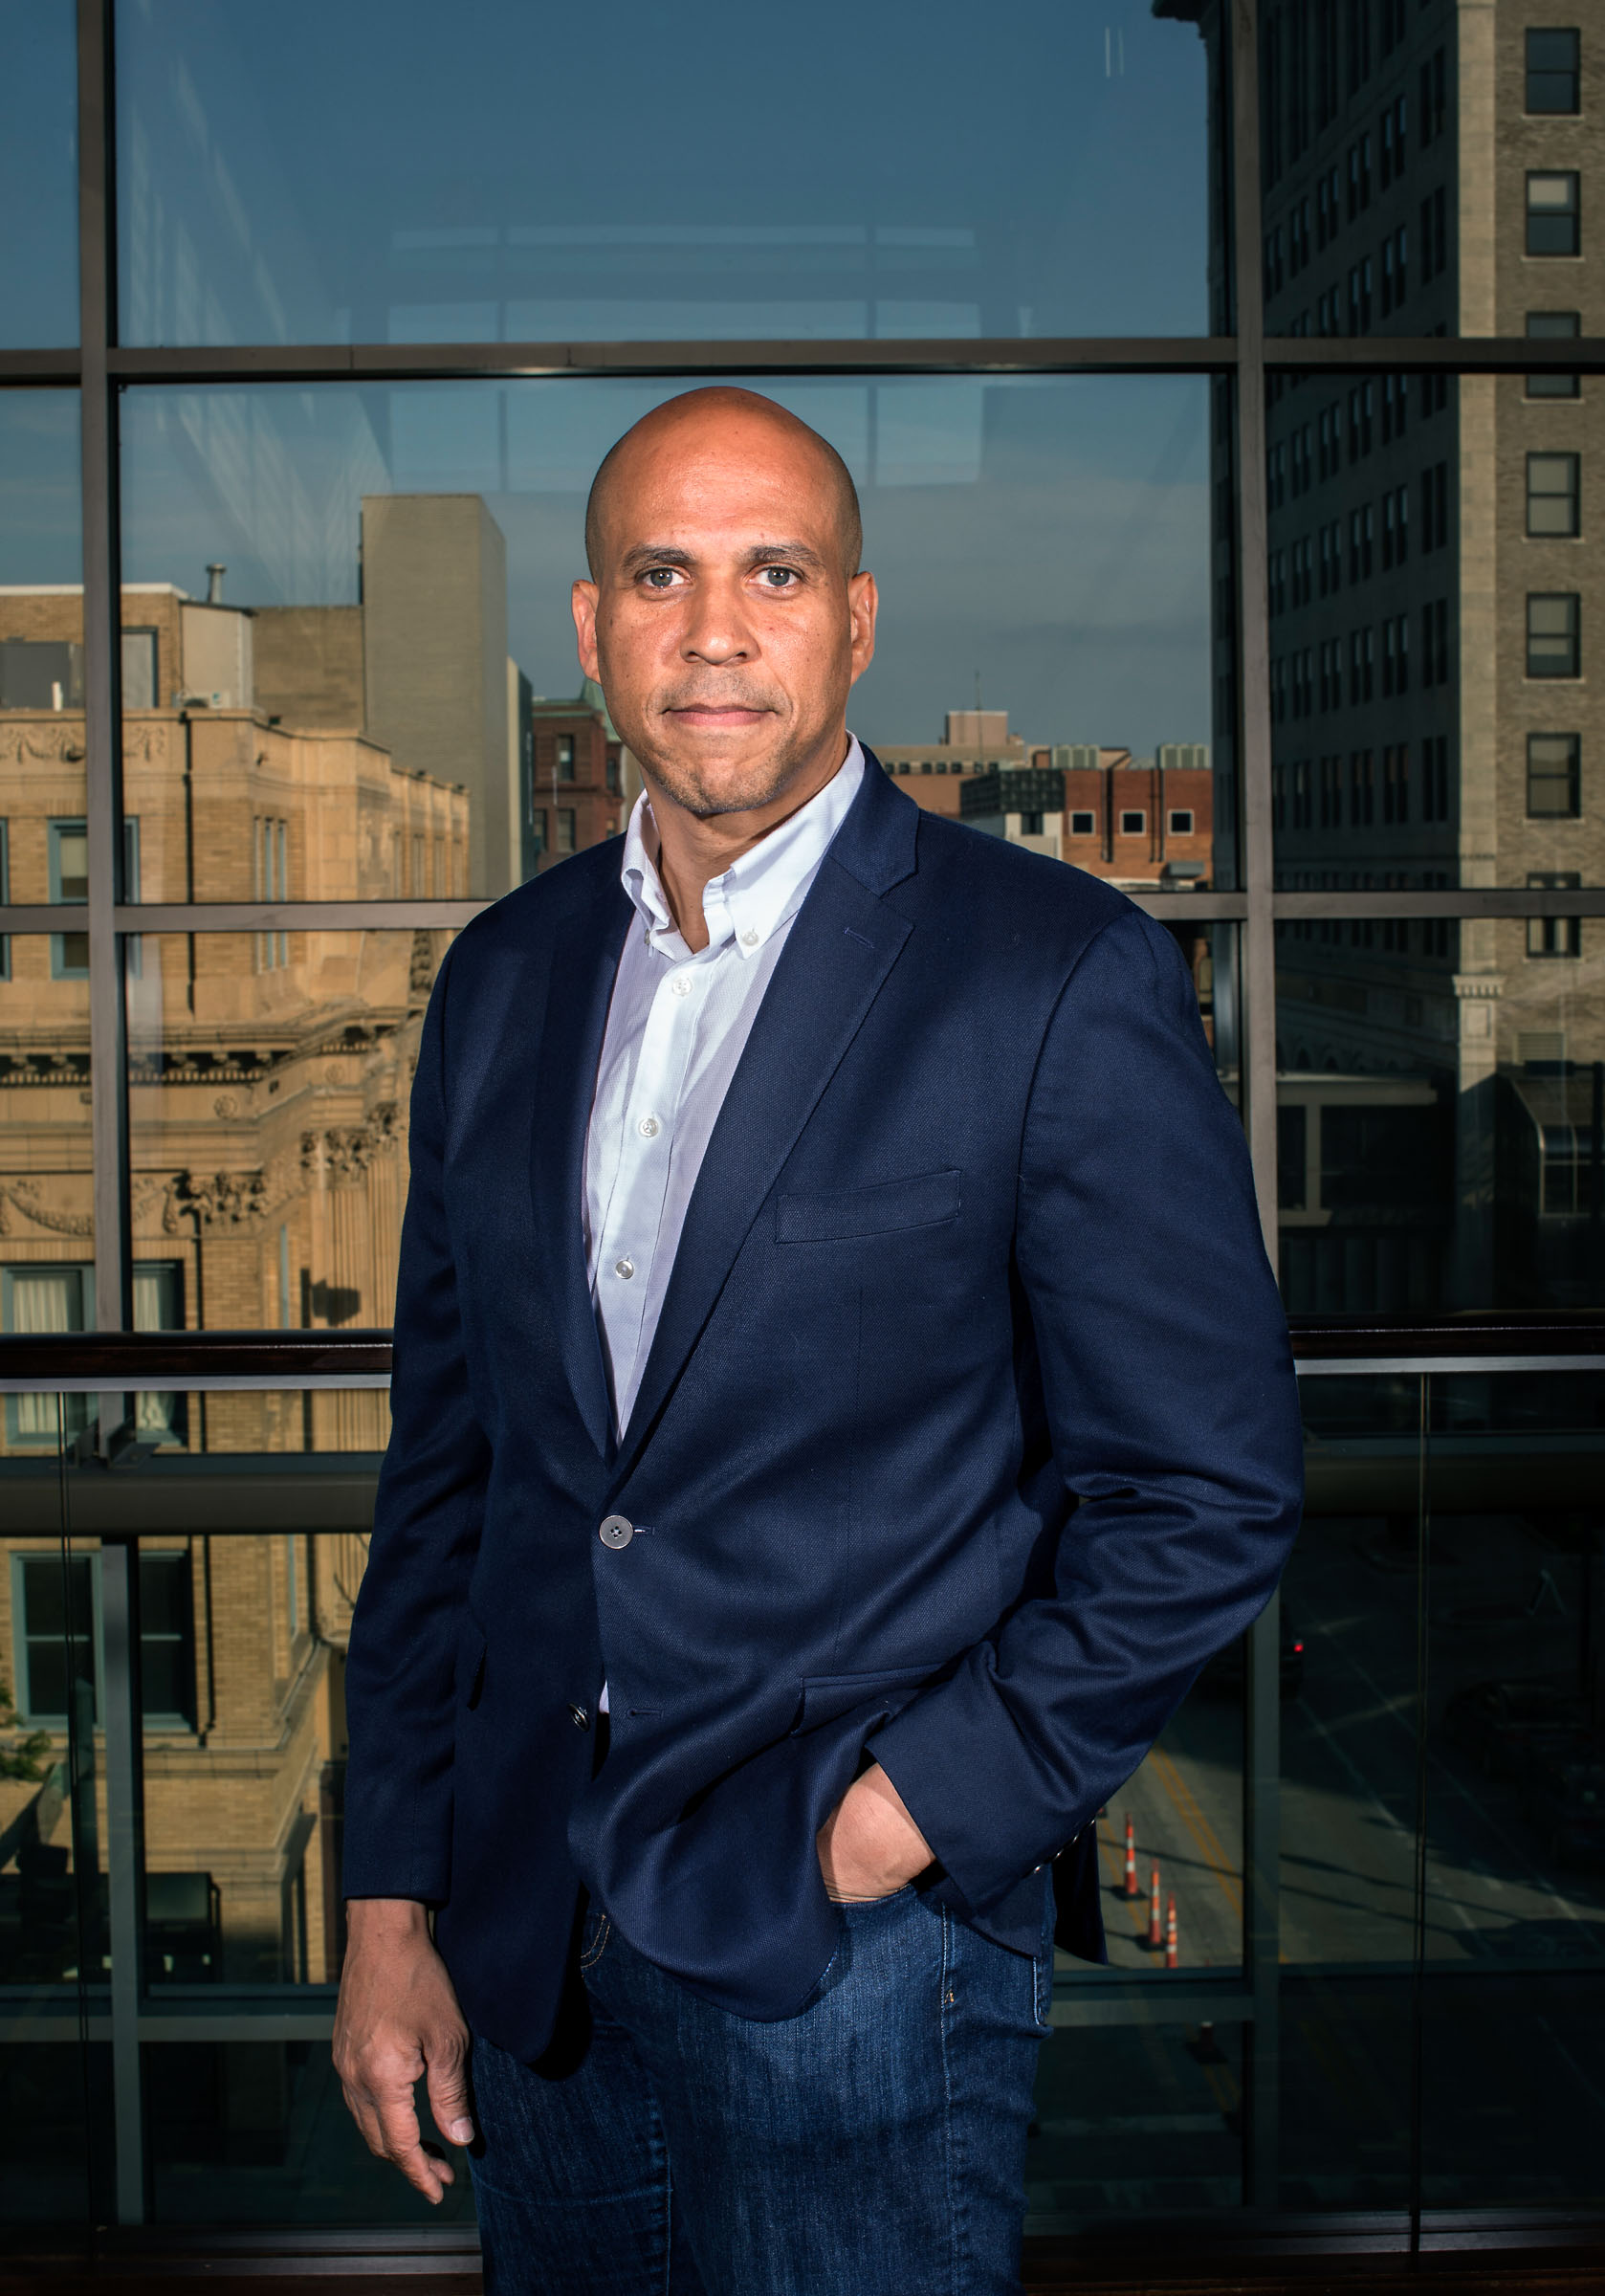 Senator Cory Booker stands for a portrait in downtown Cedar Rapids, Iowa on Saturday June 8, 2019.
                  
                  Summary - Democratic Senator Cory Booker of New Jersey campaigned in Des Moines, Ames, Iowa City, and Cedar Rapids during a two day swing across Iowa. Senator Booker attended the Iowa Democratic Hall of Fame event in Cedar Rapids along with 18 other candidates for the party's 2020 presidential nomination. (Danny Wilcox Frazier—VII/Redux)